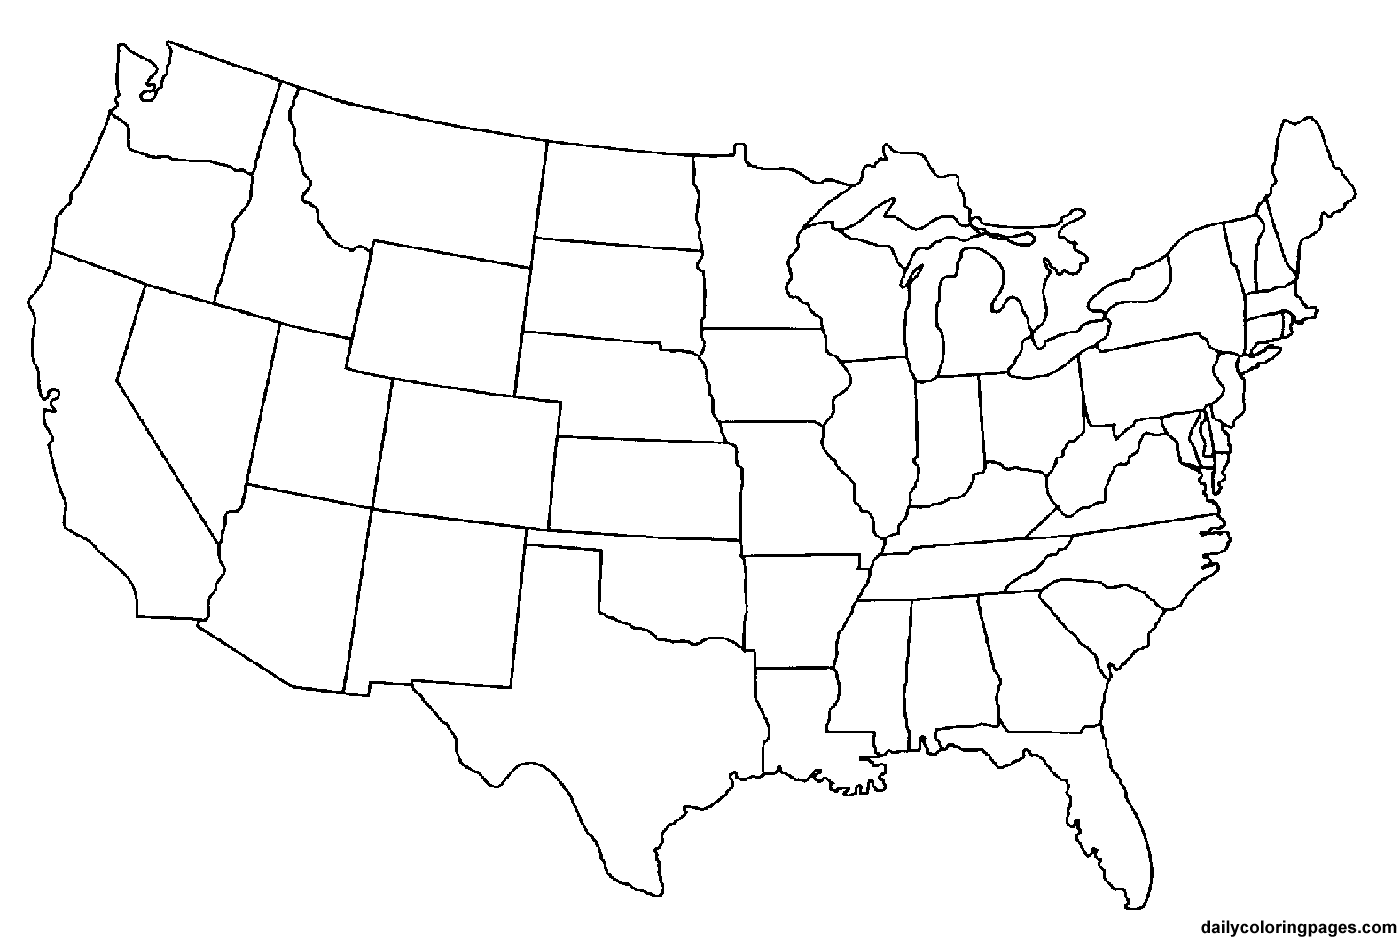 Blank United States Map Coloring Page Image